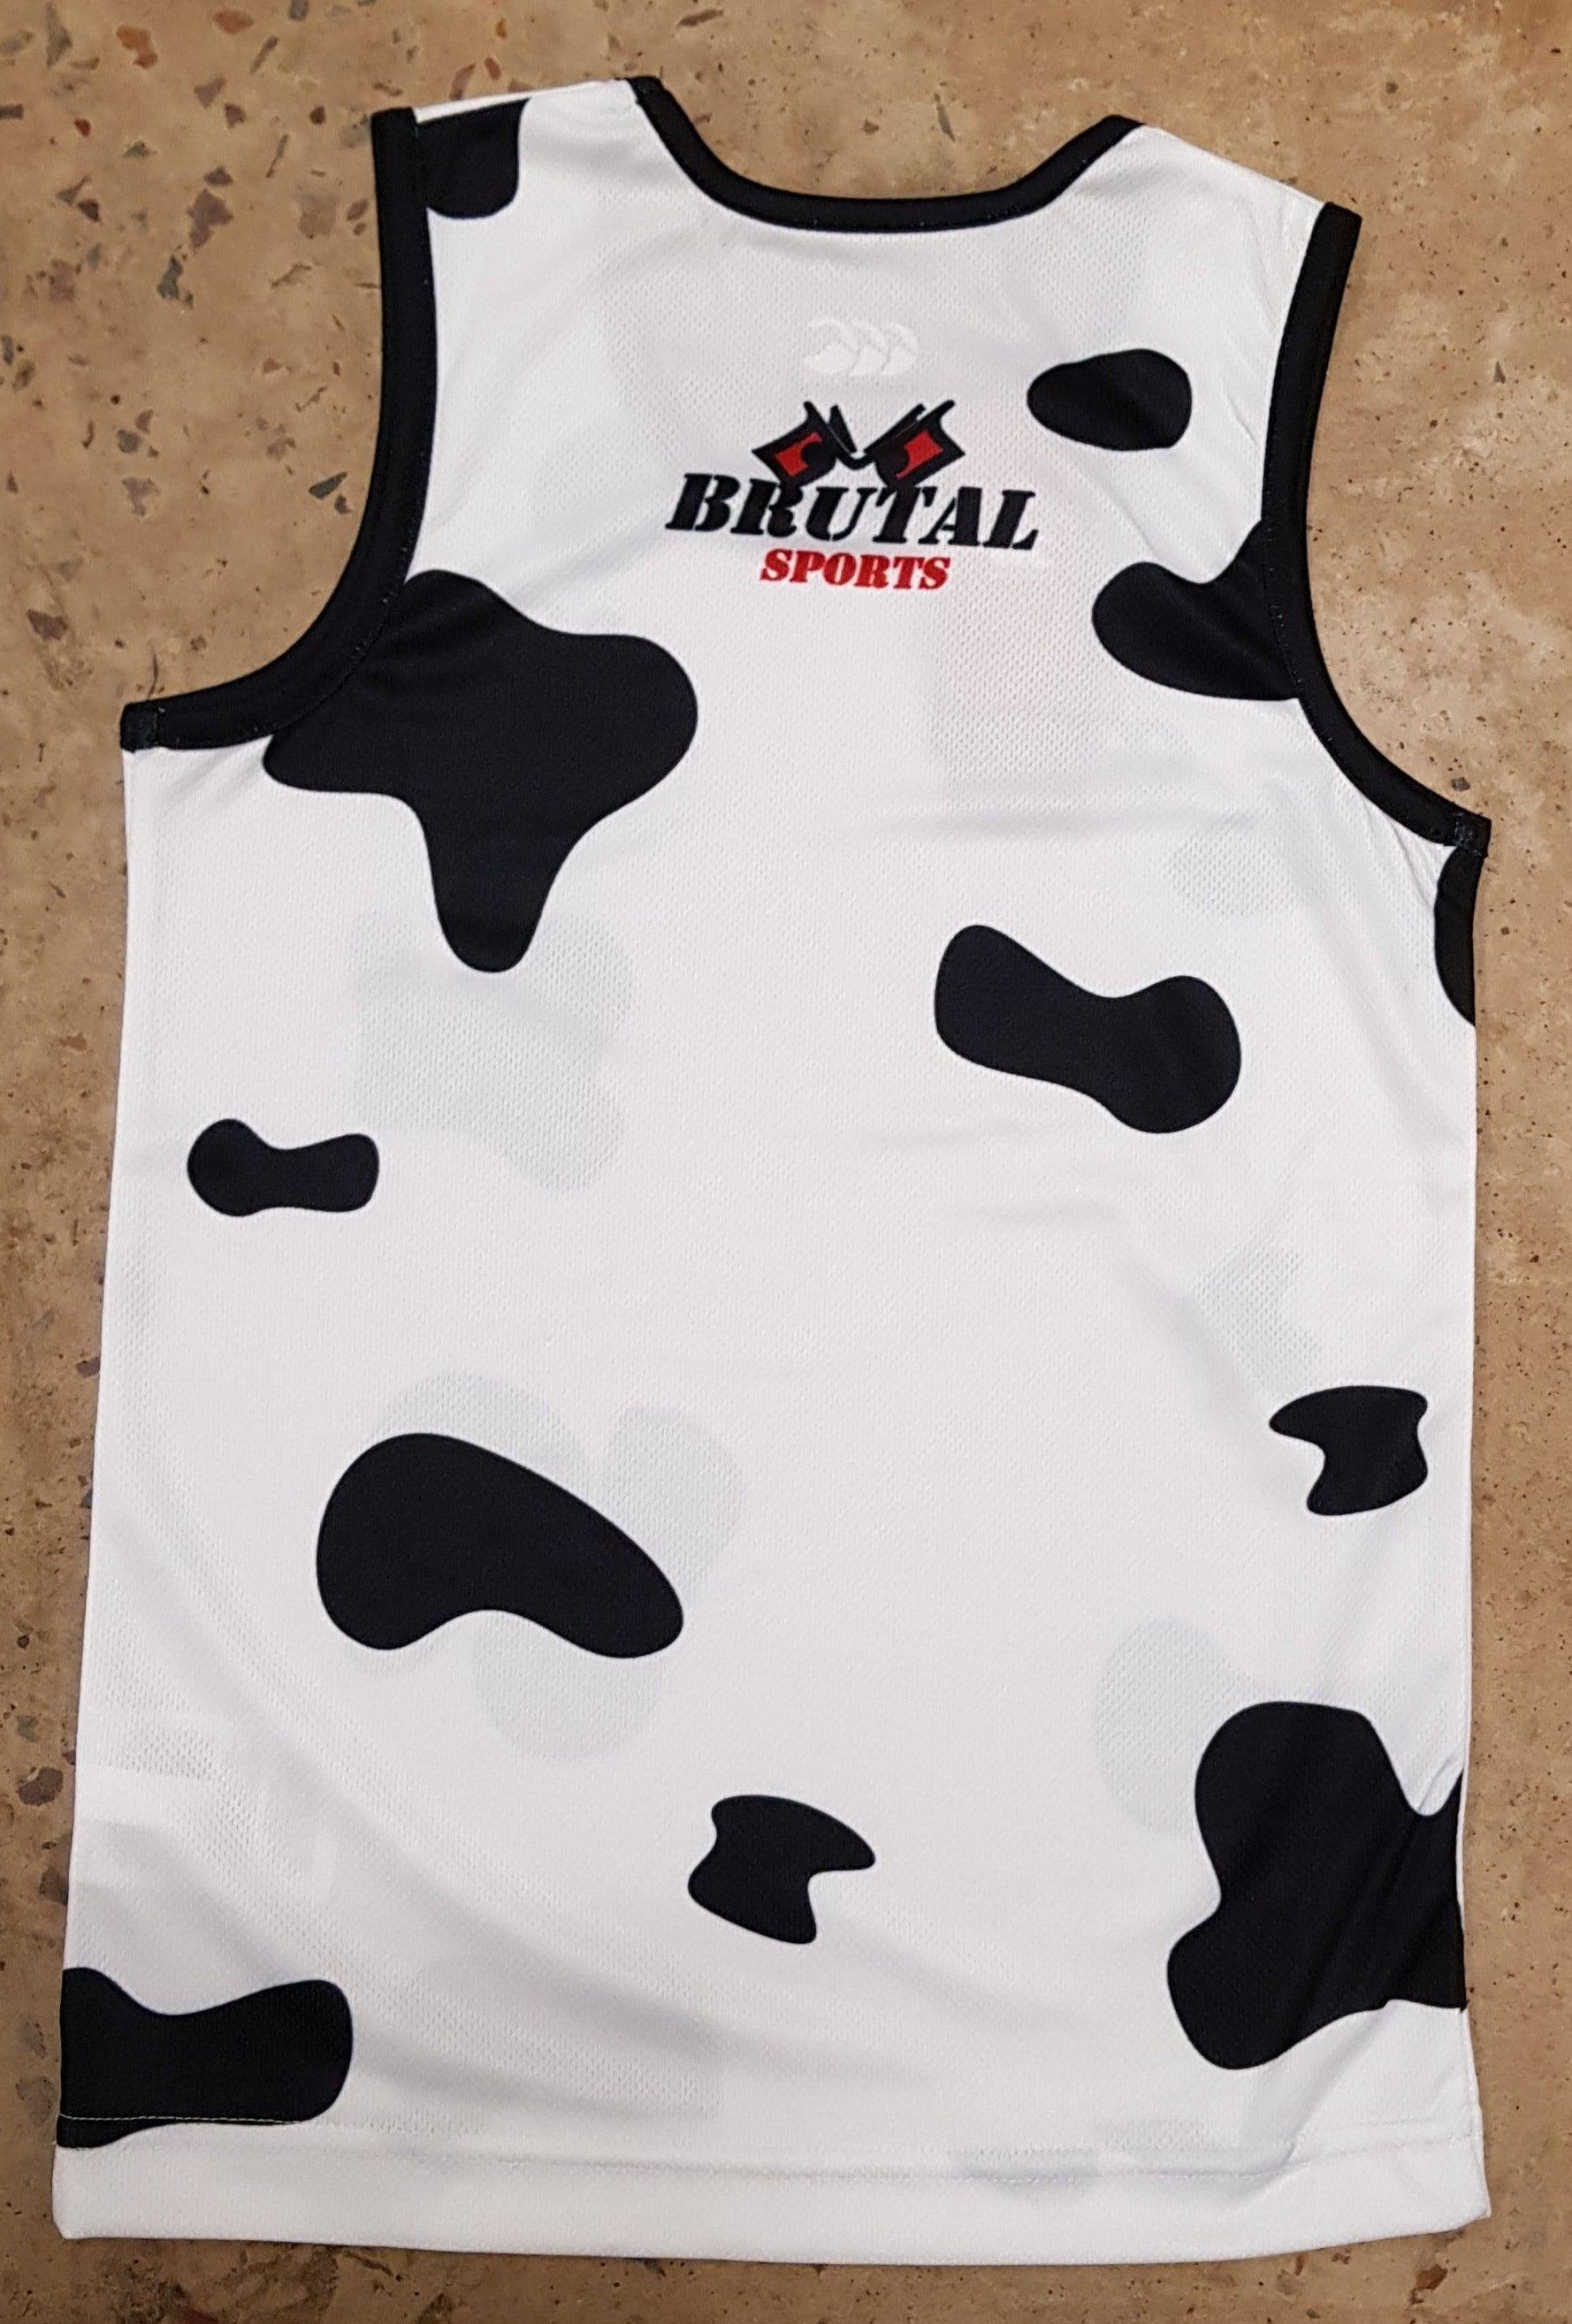 Mad Cows Kids Singlet - The Rugby Shop Darwin